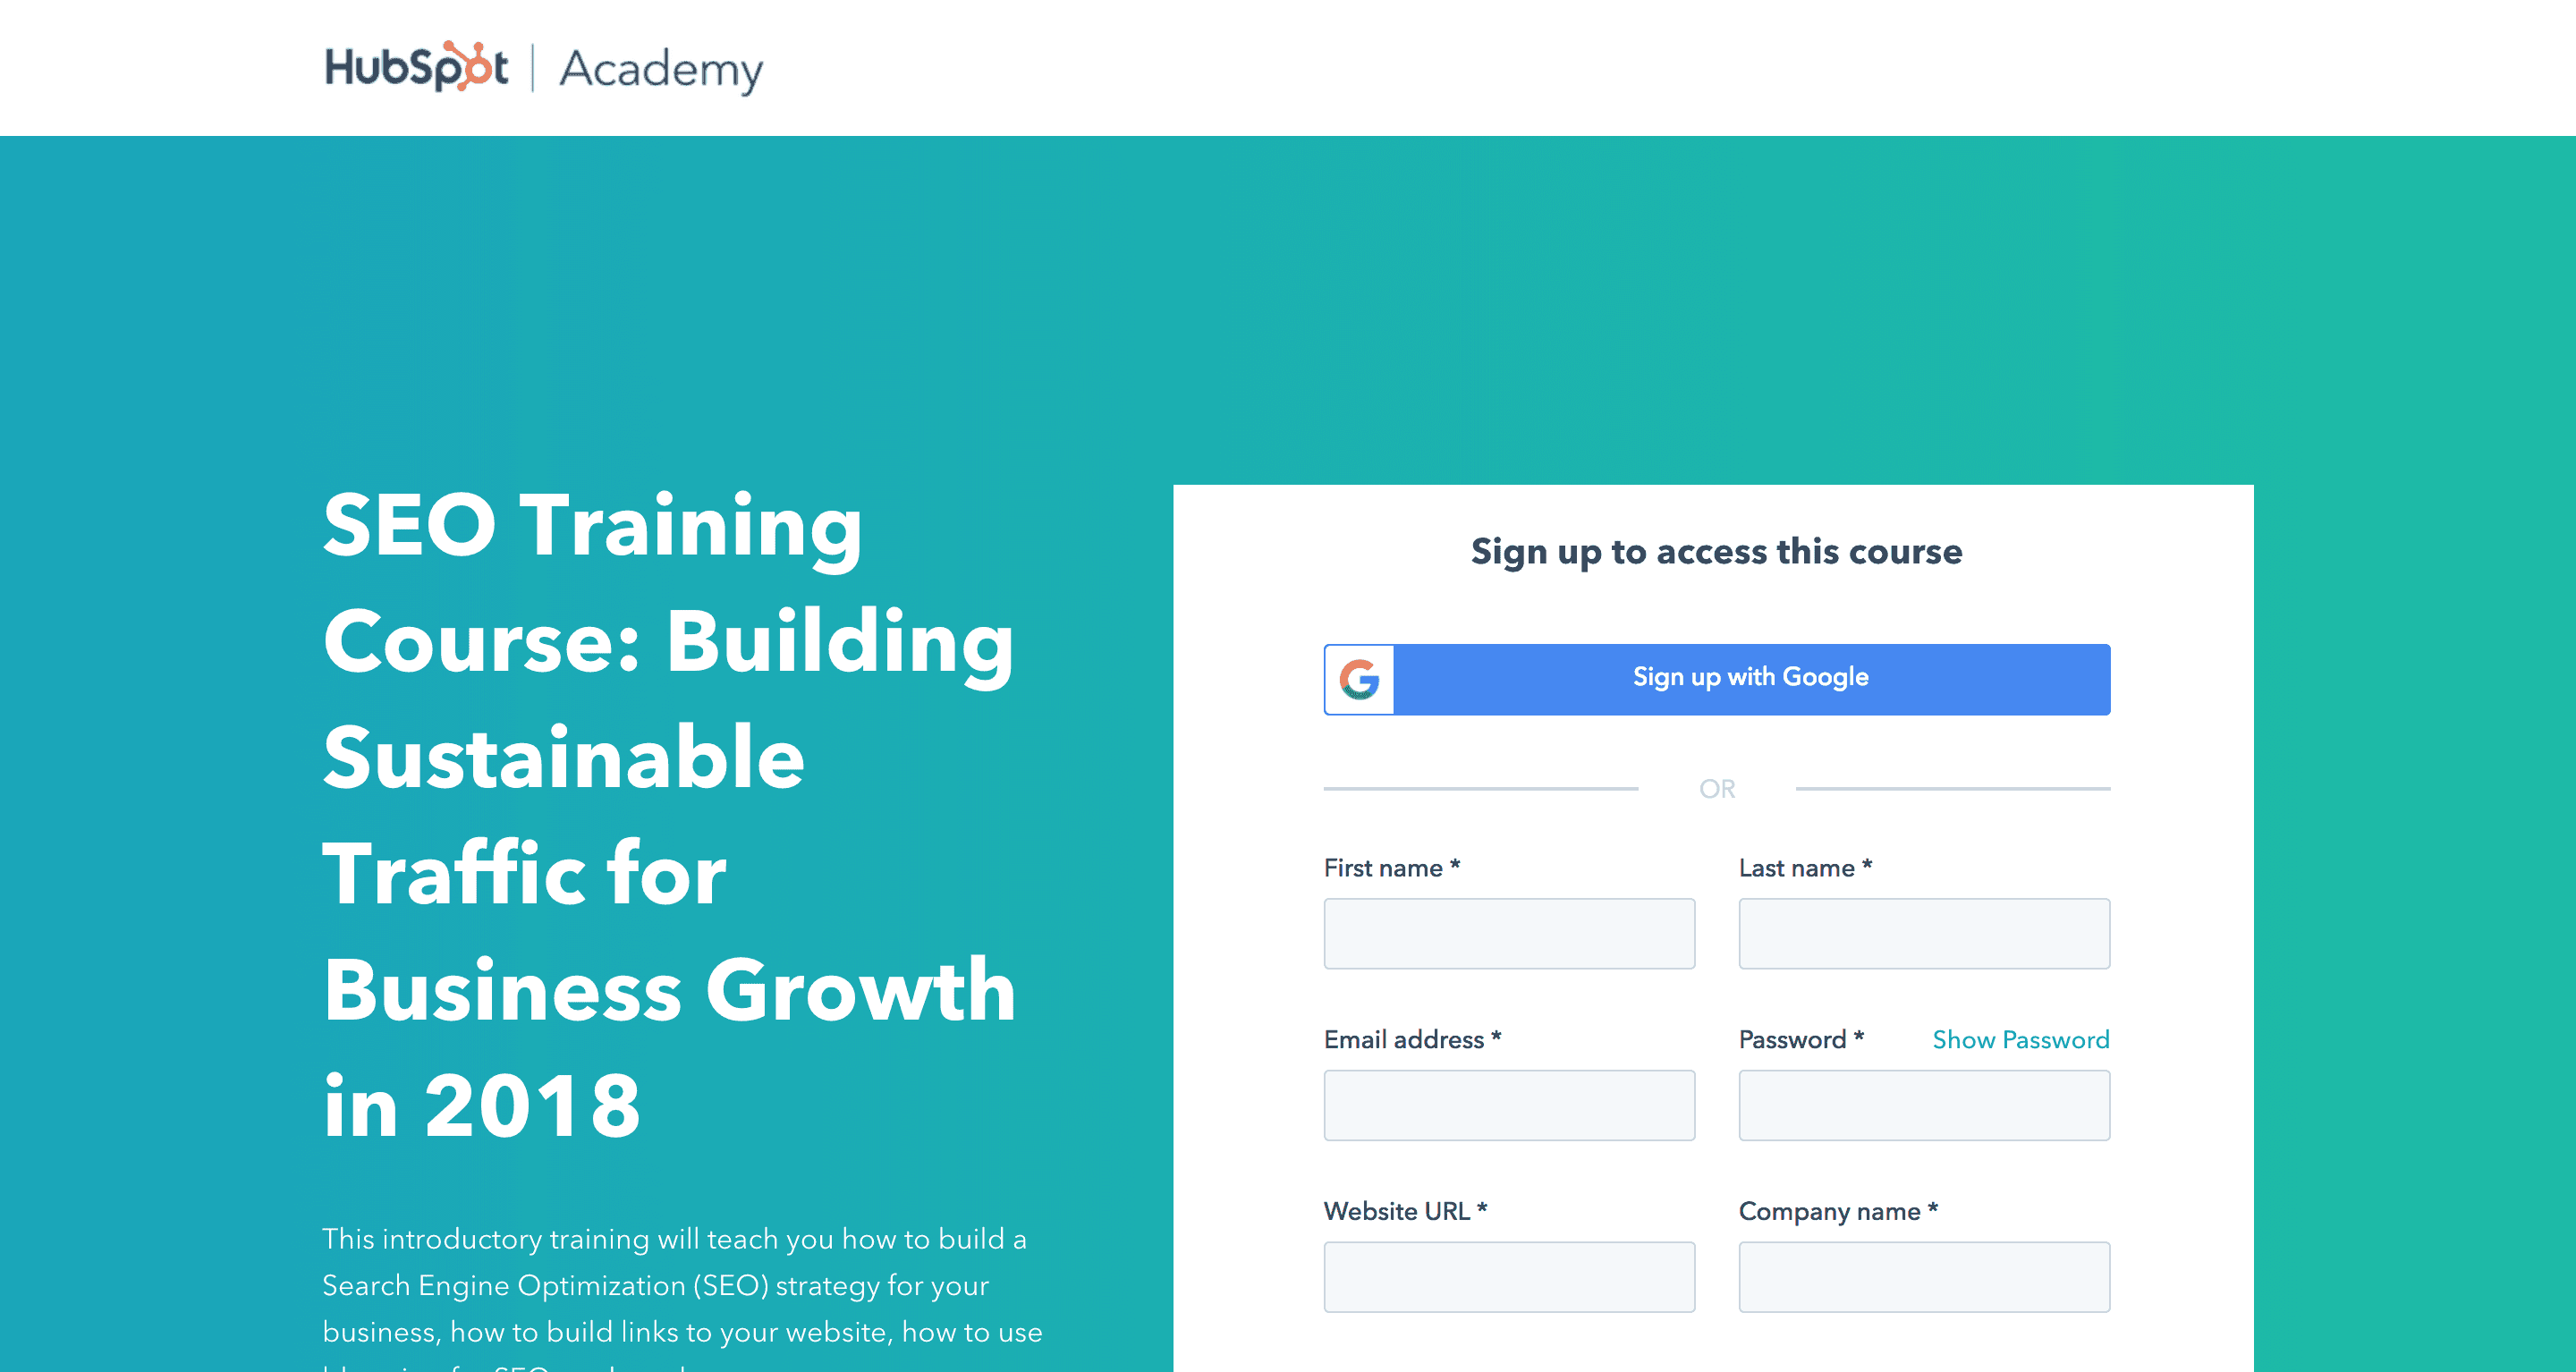 Hubspot Academy SEO course signup form